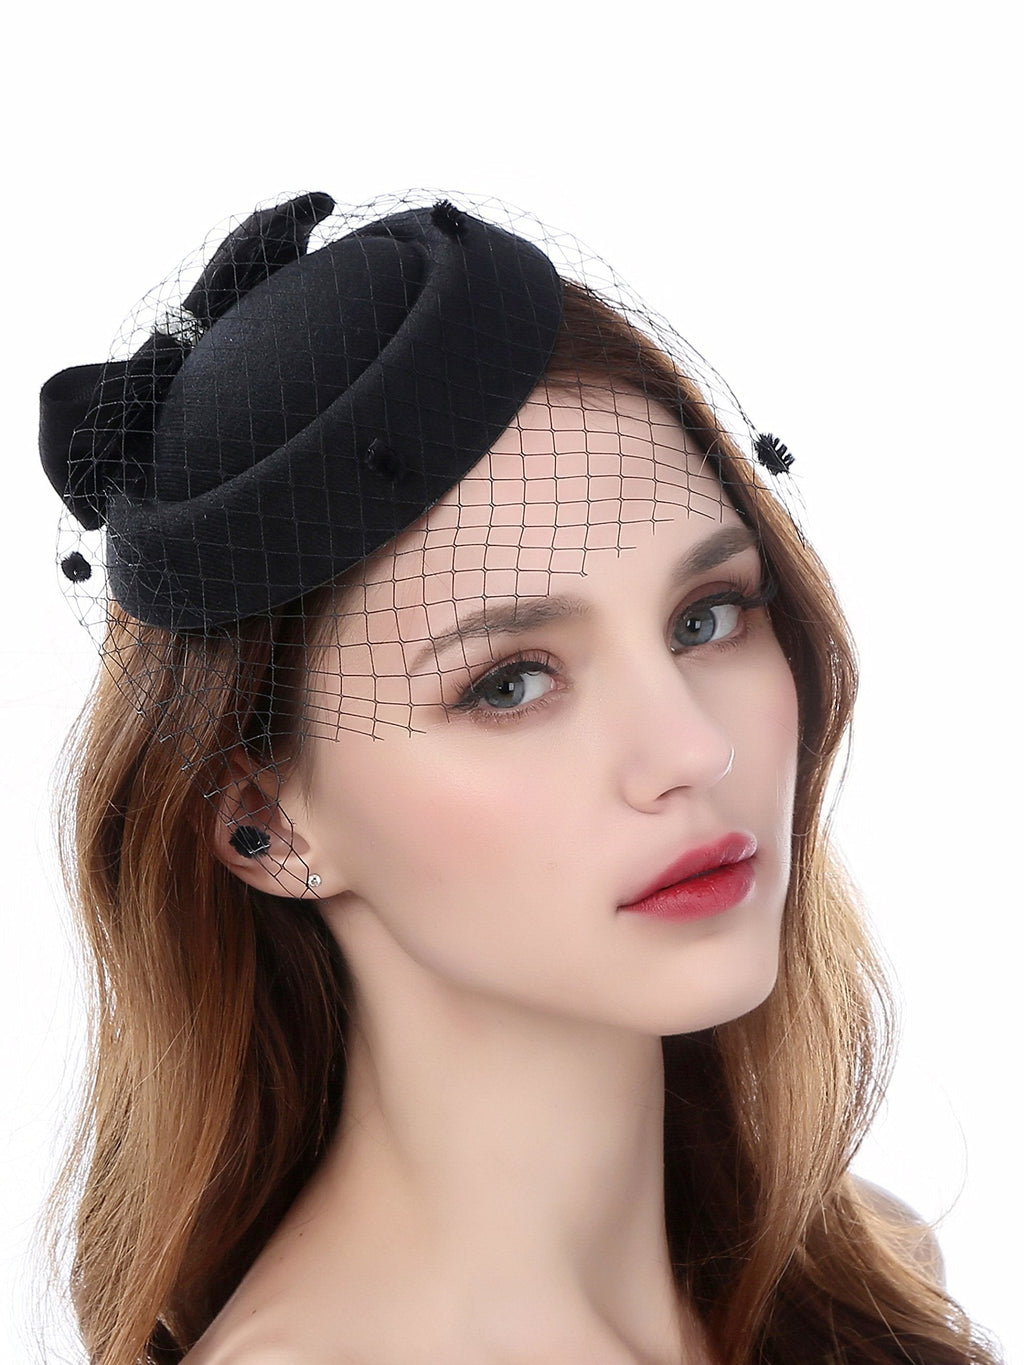 [Australia] - Zivyes Fascinator Hats for Women Pillbox Hat with Veil Headband and a Forked Clip Tea Party Headwear A10-black 